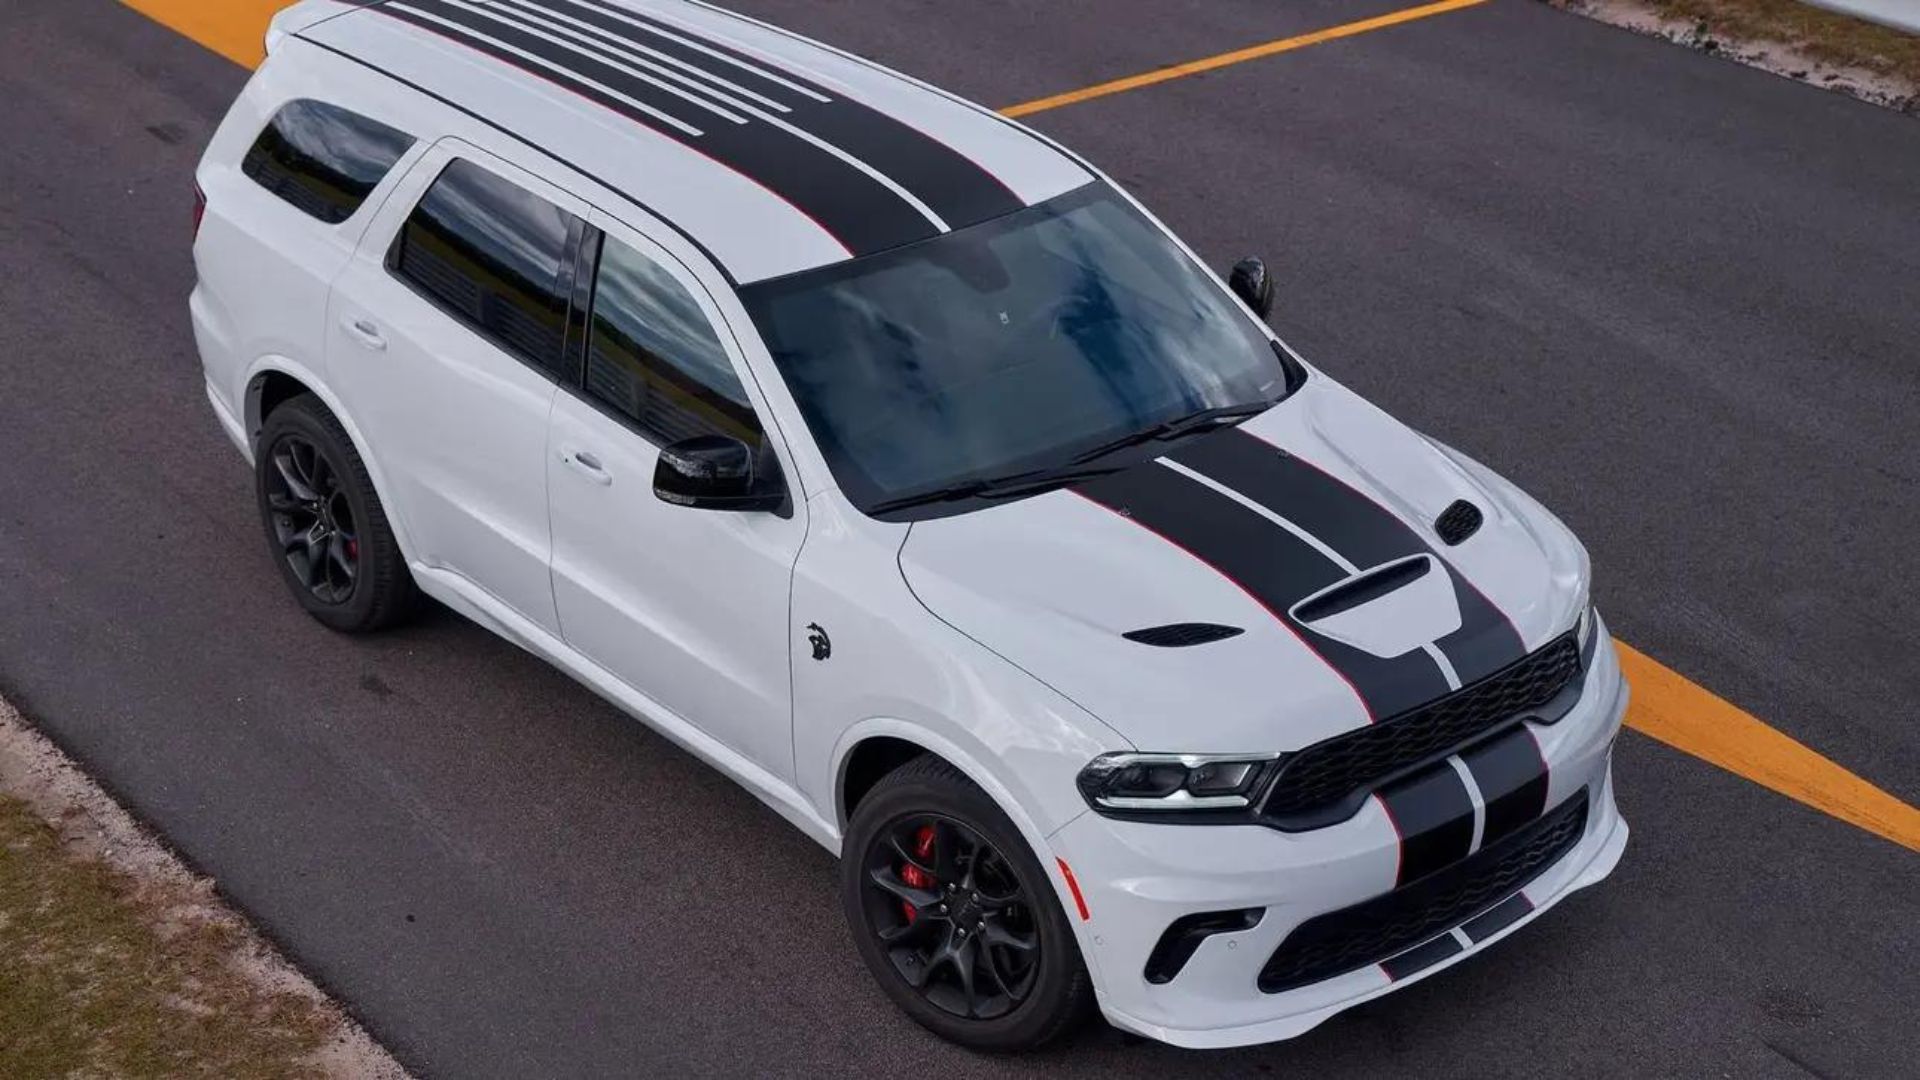 Crazy engines: Dodge for literally Hellcat-ing everything